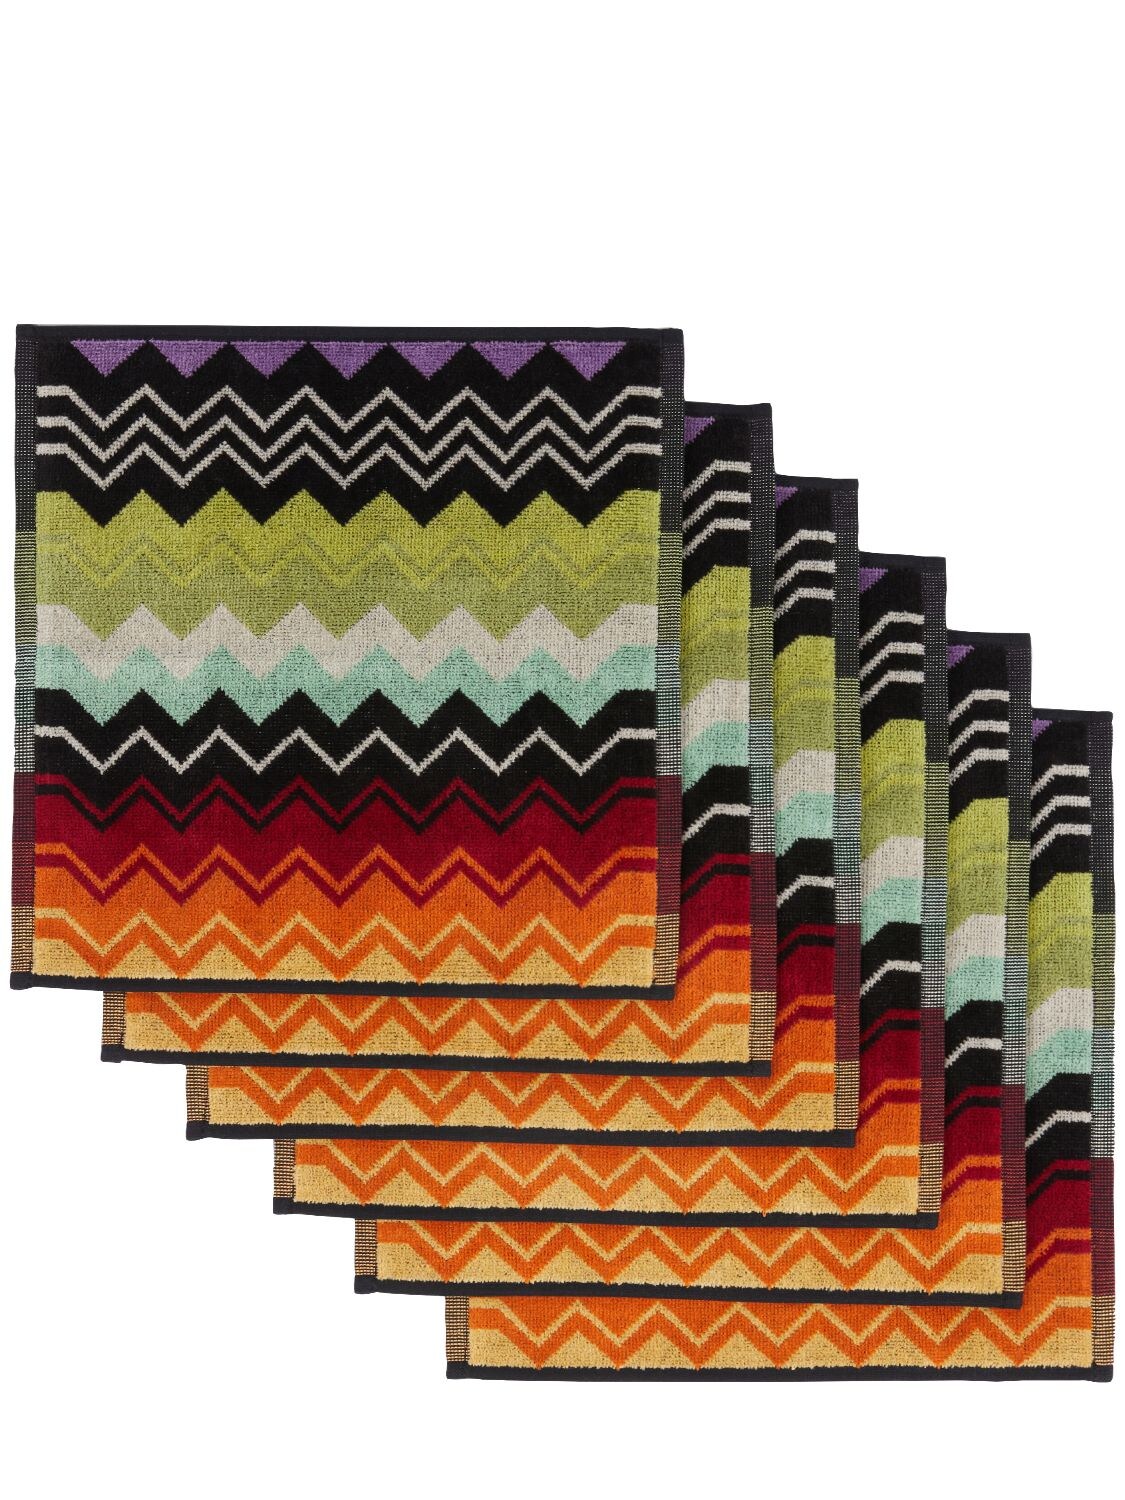 Missoni Home Collection Giacomo Set Of 6 Cotton Hand Towels In Multicolor